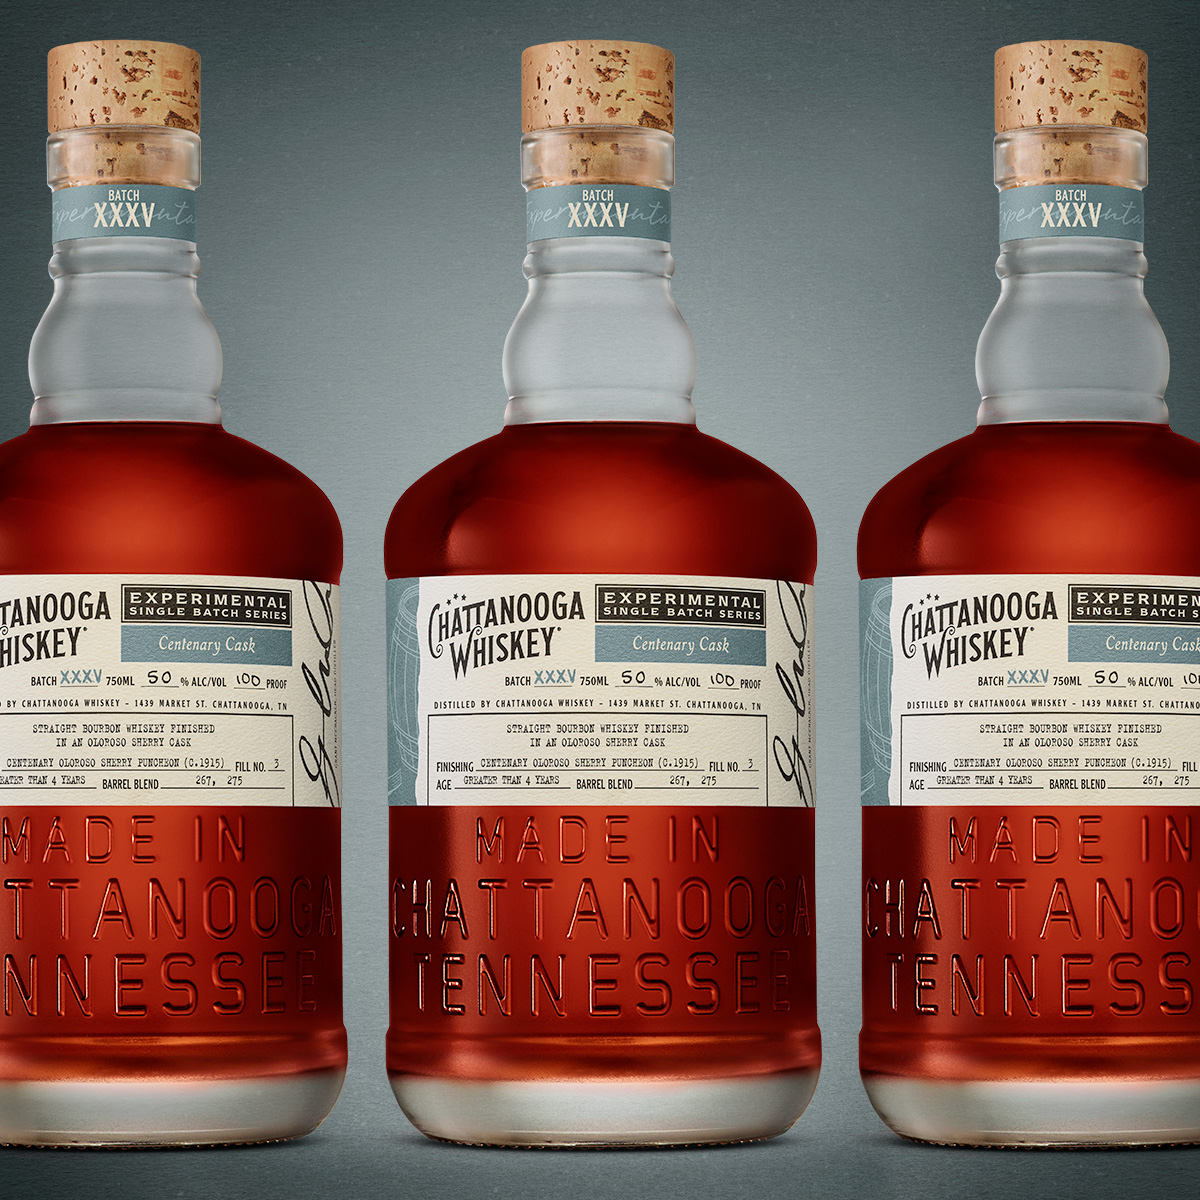 Chattanooga Whiskey New Experimental Batch 035: Centenary Cask Announced